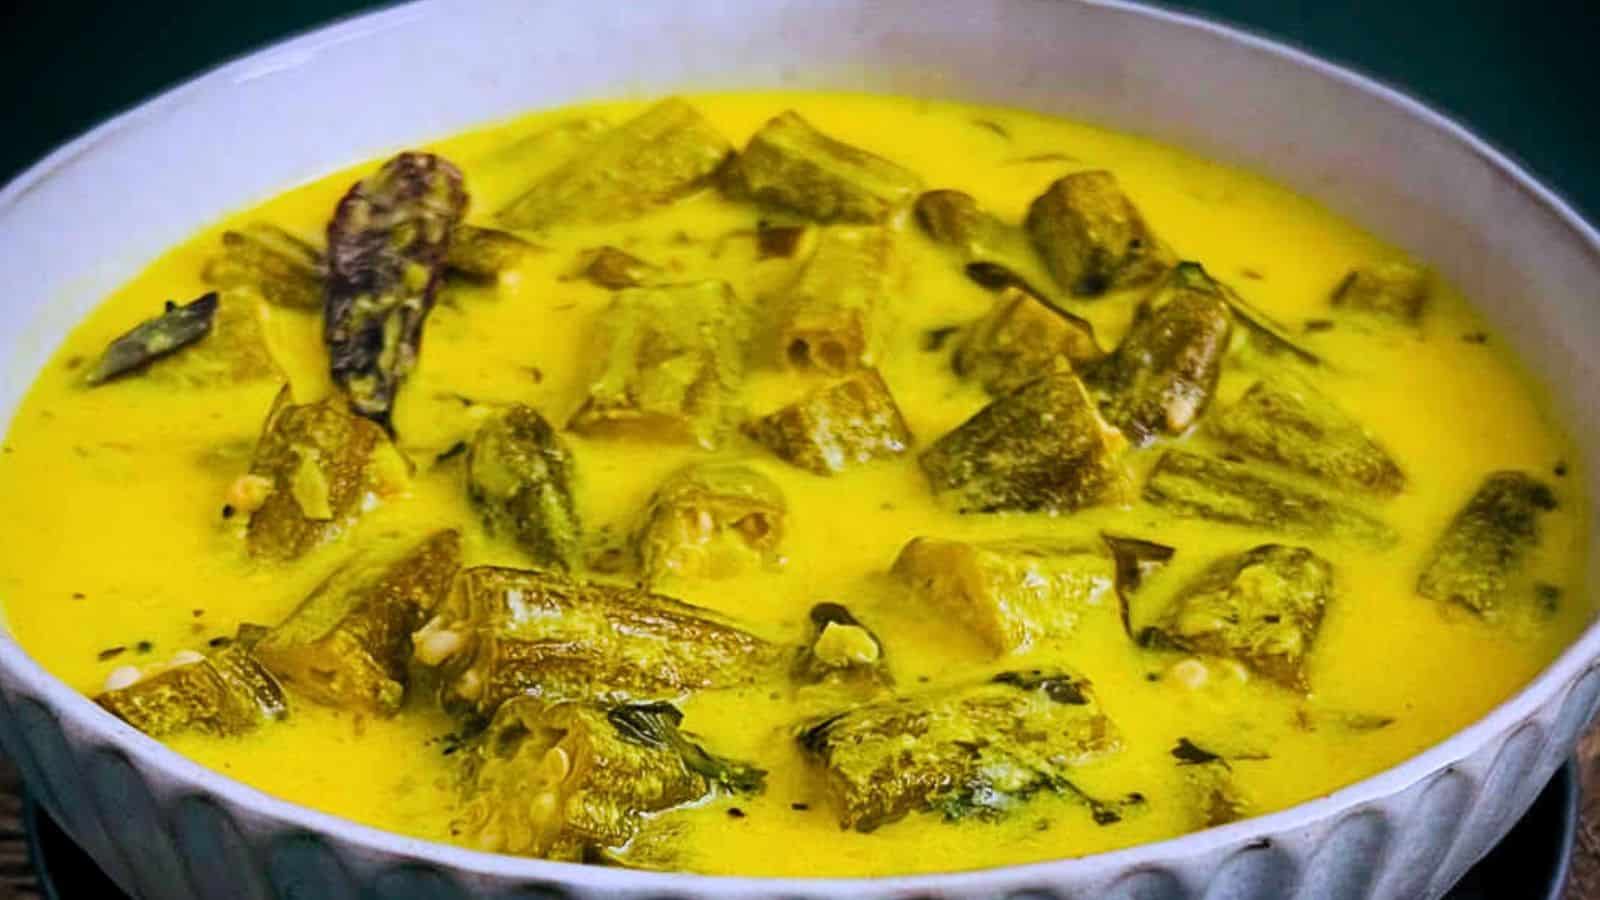 A bowl of Bhindi Kadhi with okra pieces in a creamy yellow sauce.